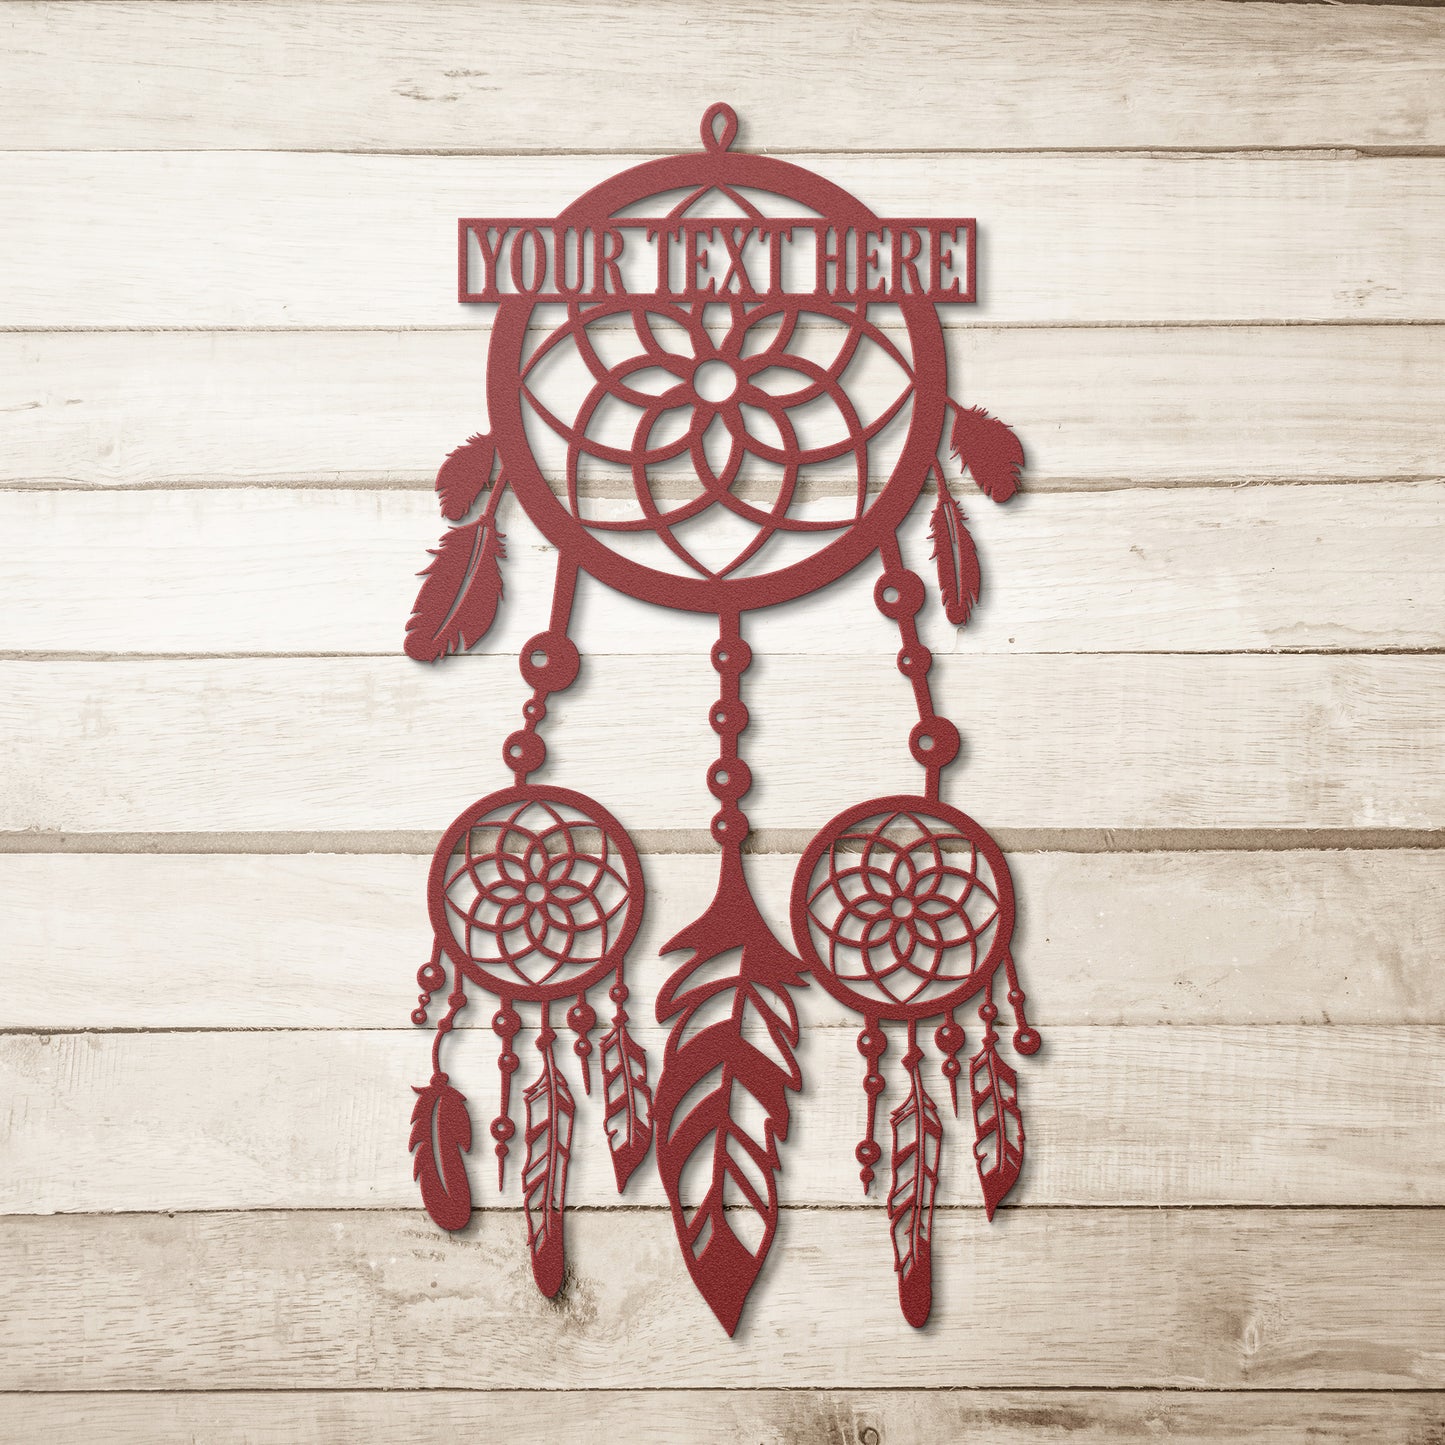 Personalized Peaceful Dreamcatcher Name Metal Sign | Custom Dreamcatcher Sign | Personalizable Dreamcatcher Name Monogram Gift | Astrology